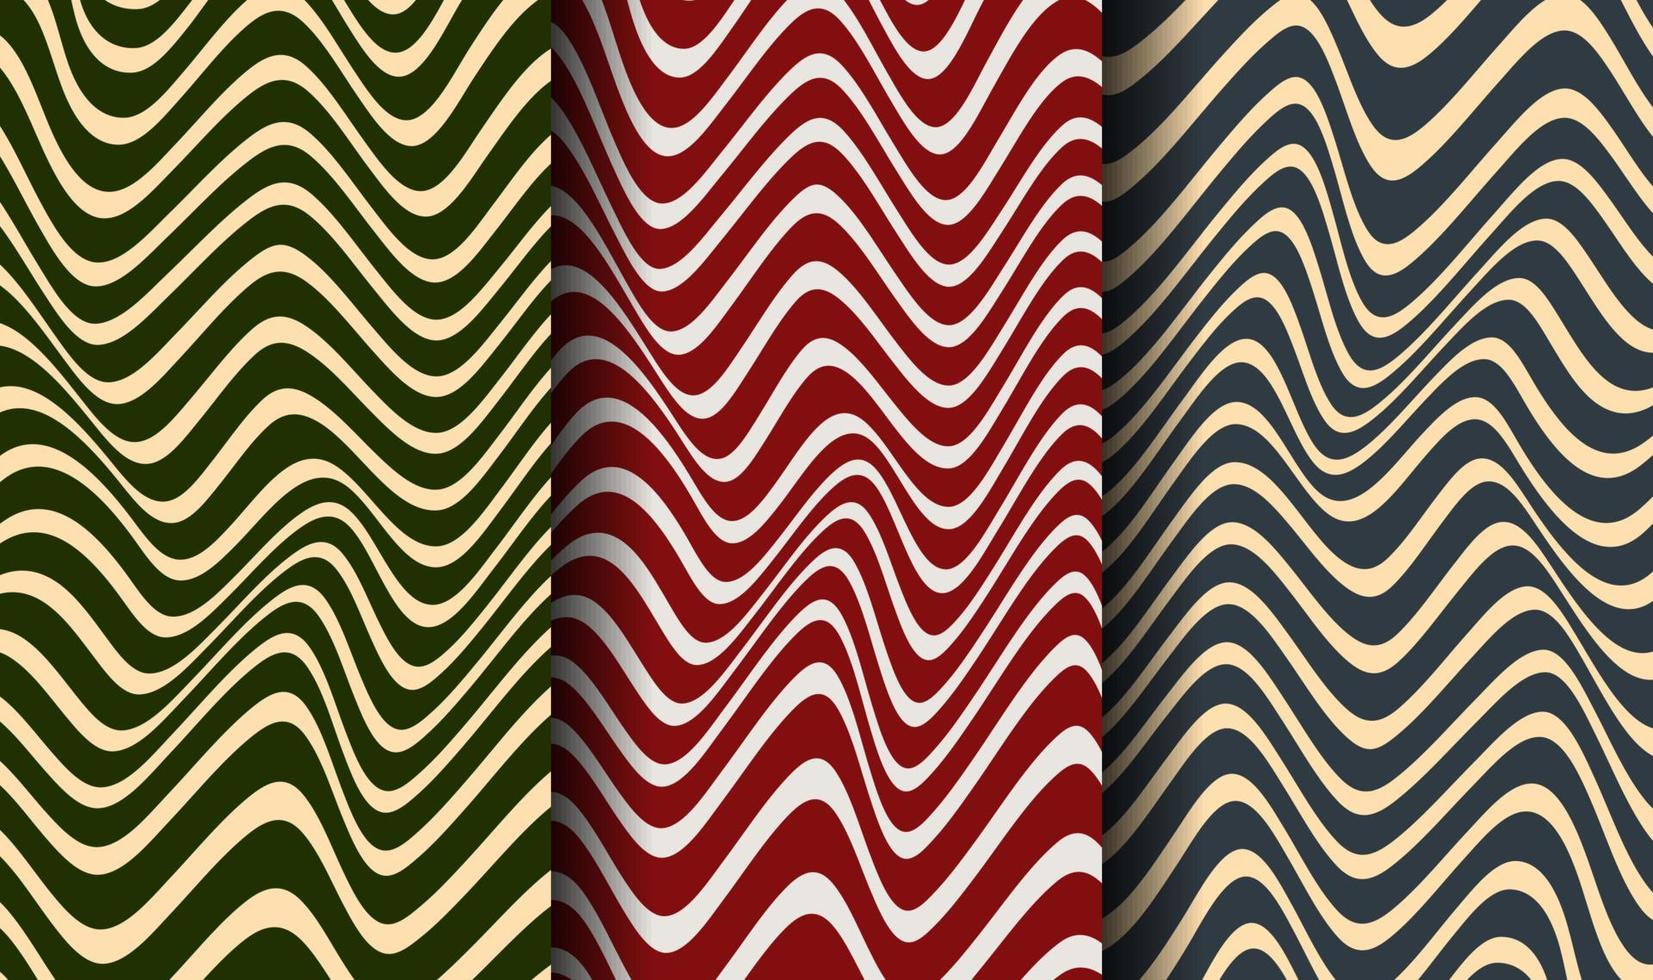 Striped undulating pattern of shades. A design concept for celebrating Christmas vector